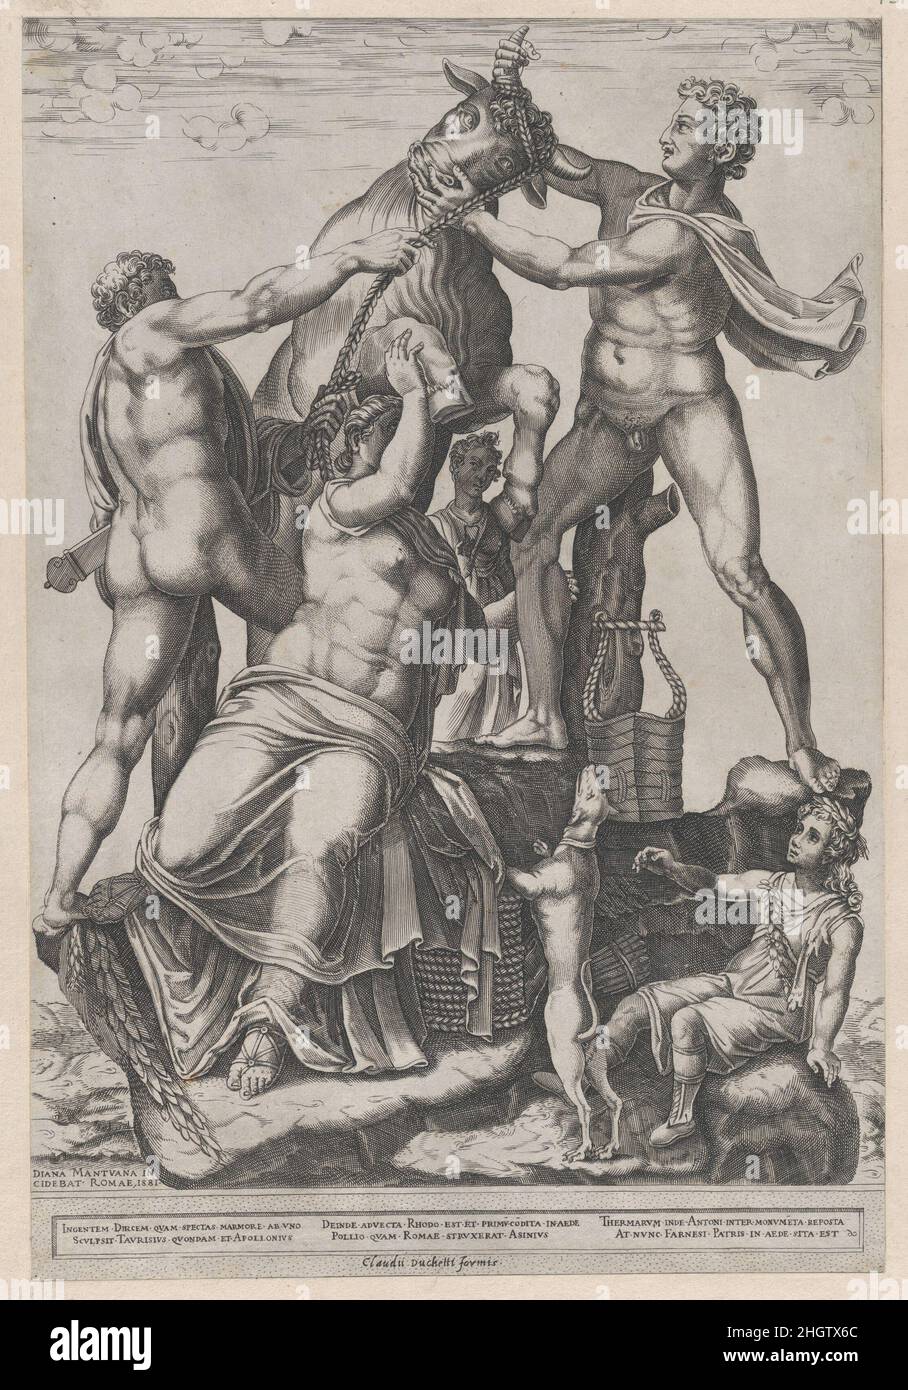 Speculum Romanae Magnificentiae: Amphion and Zethus Tying Dirce to a Wild Bull [The Farnese Bull] 1581 Diana Scultori Italian This print comes from the museum’s copy of the Speculum Romanae Magnificentiae (The Mirror of Roman Magnificence) The Speculum found its origin in the publishing endeavors of Antonio Salamanca and Antonio Lafreri. During their Roman publishing careers, the two foreign publishers - who worked together between 1553 and 1563 - initiated the production of prints recording art works, architecture and city views related to Antique and Modern Rome. The prints could be bought i Stock Photo